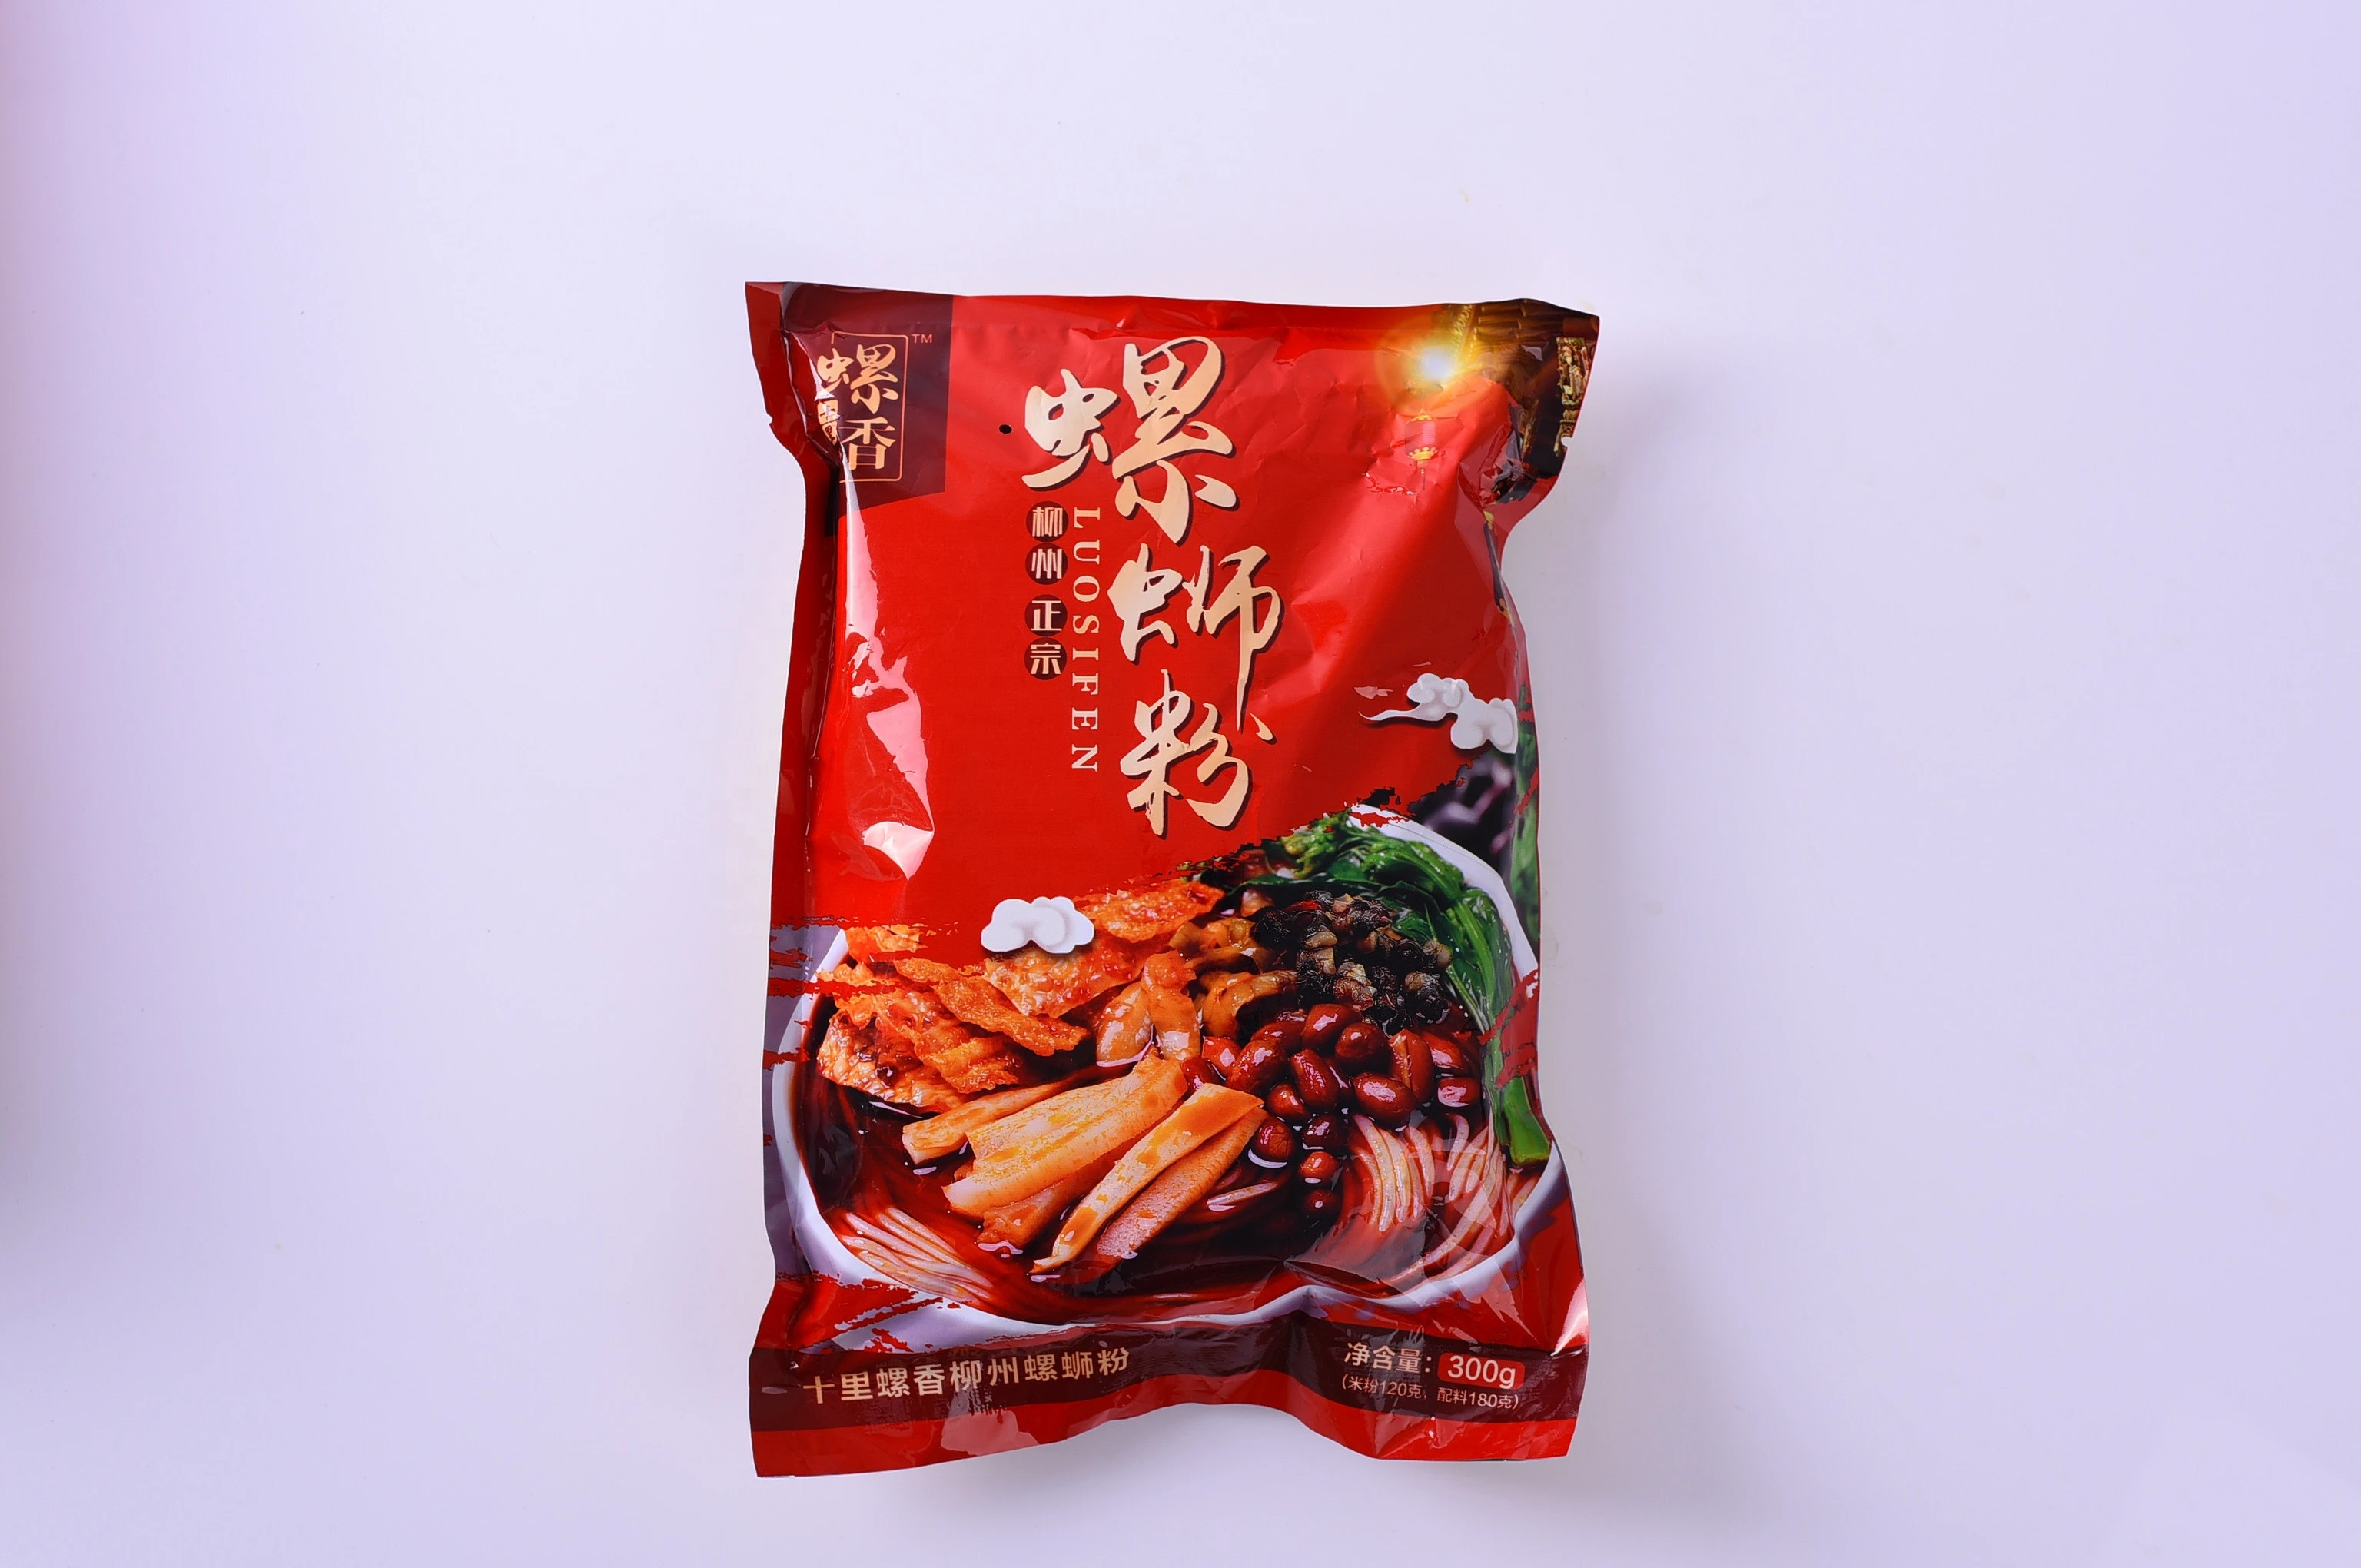 Liuzhou special snail noodles traditional snacks made instant noodles boiled rice noodles